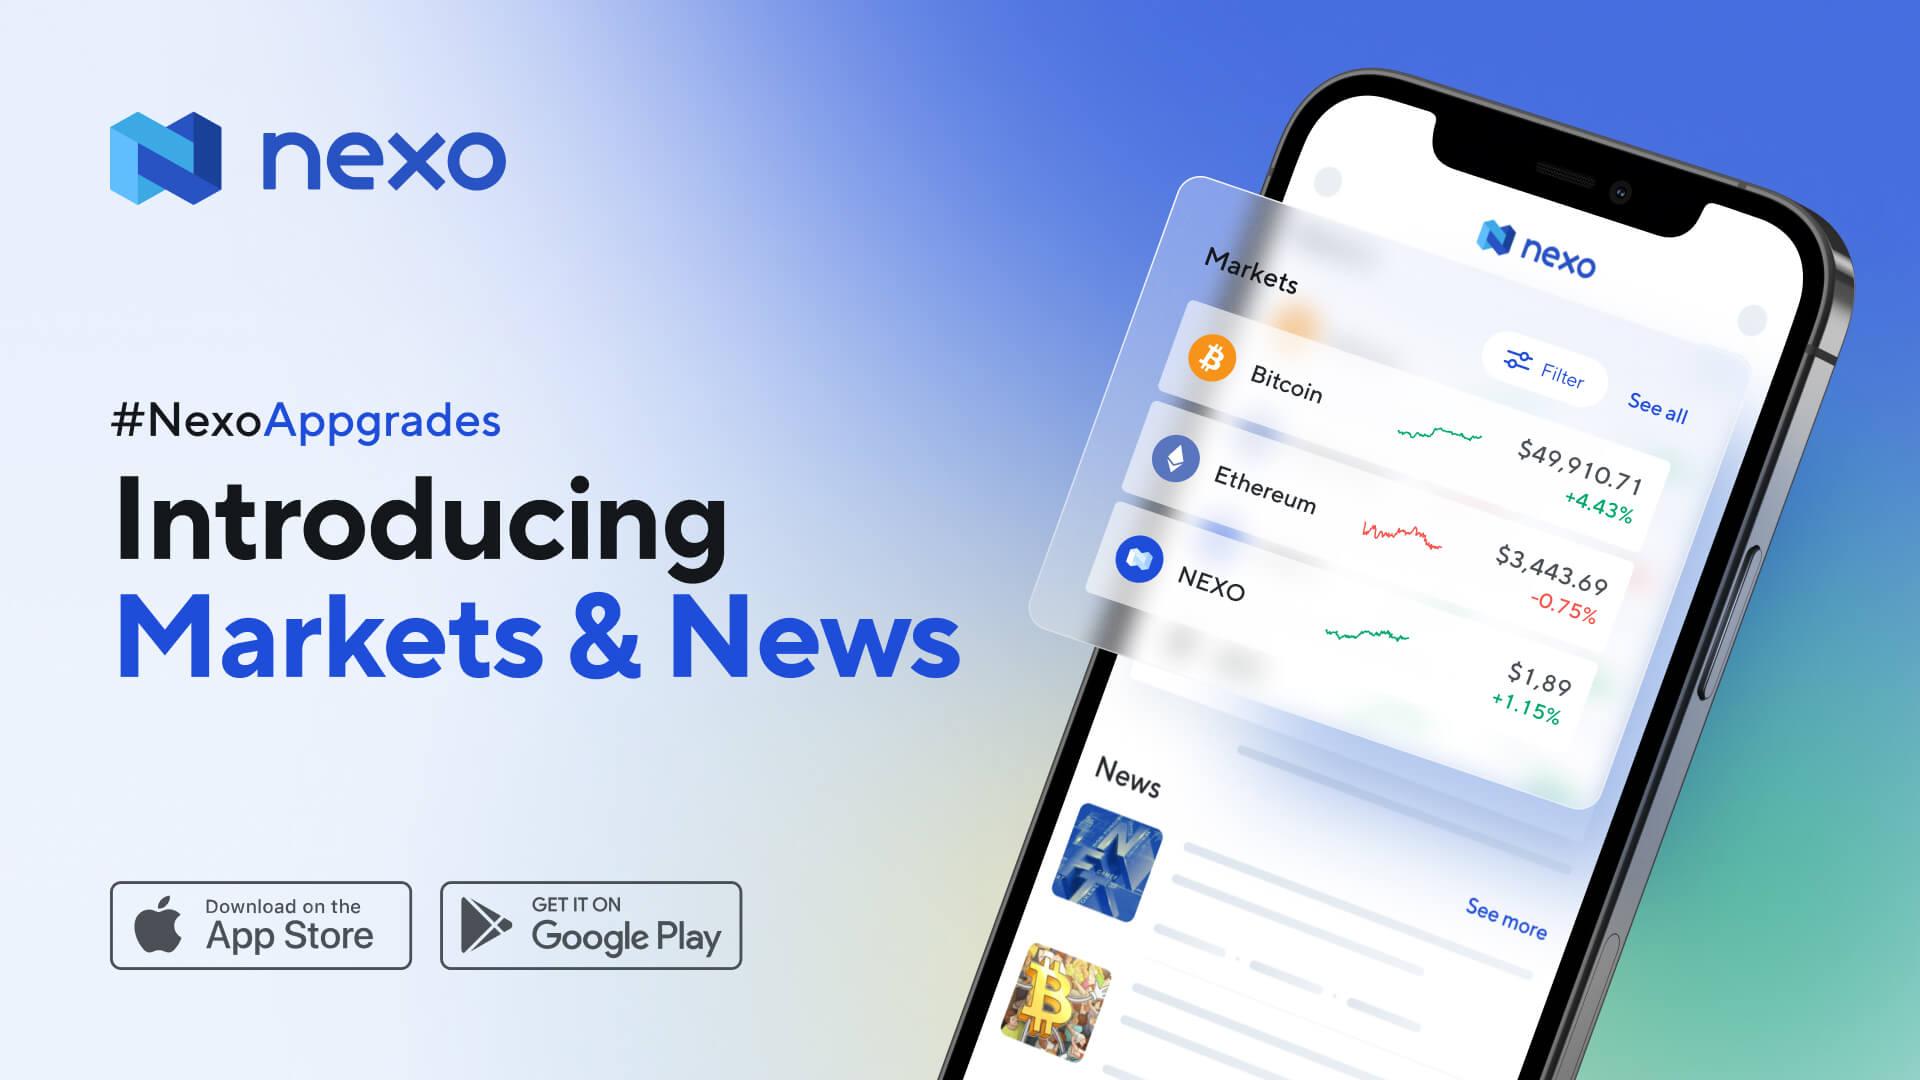 Markets & News Are Now Available on Nexo App!